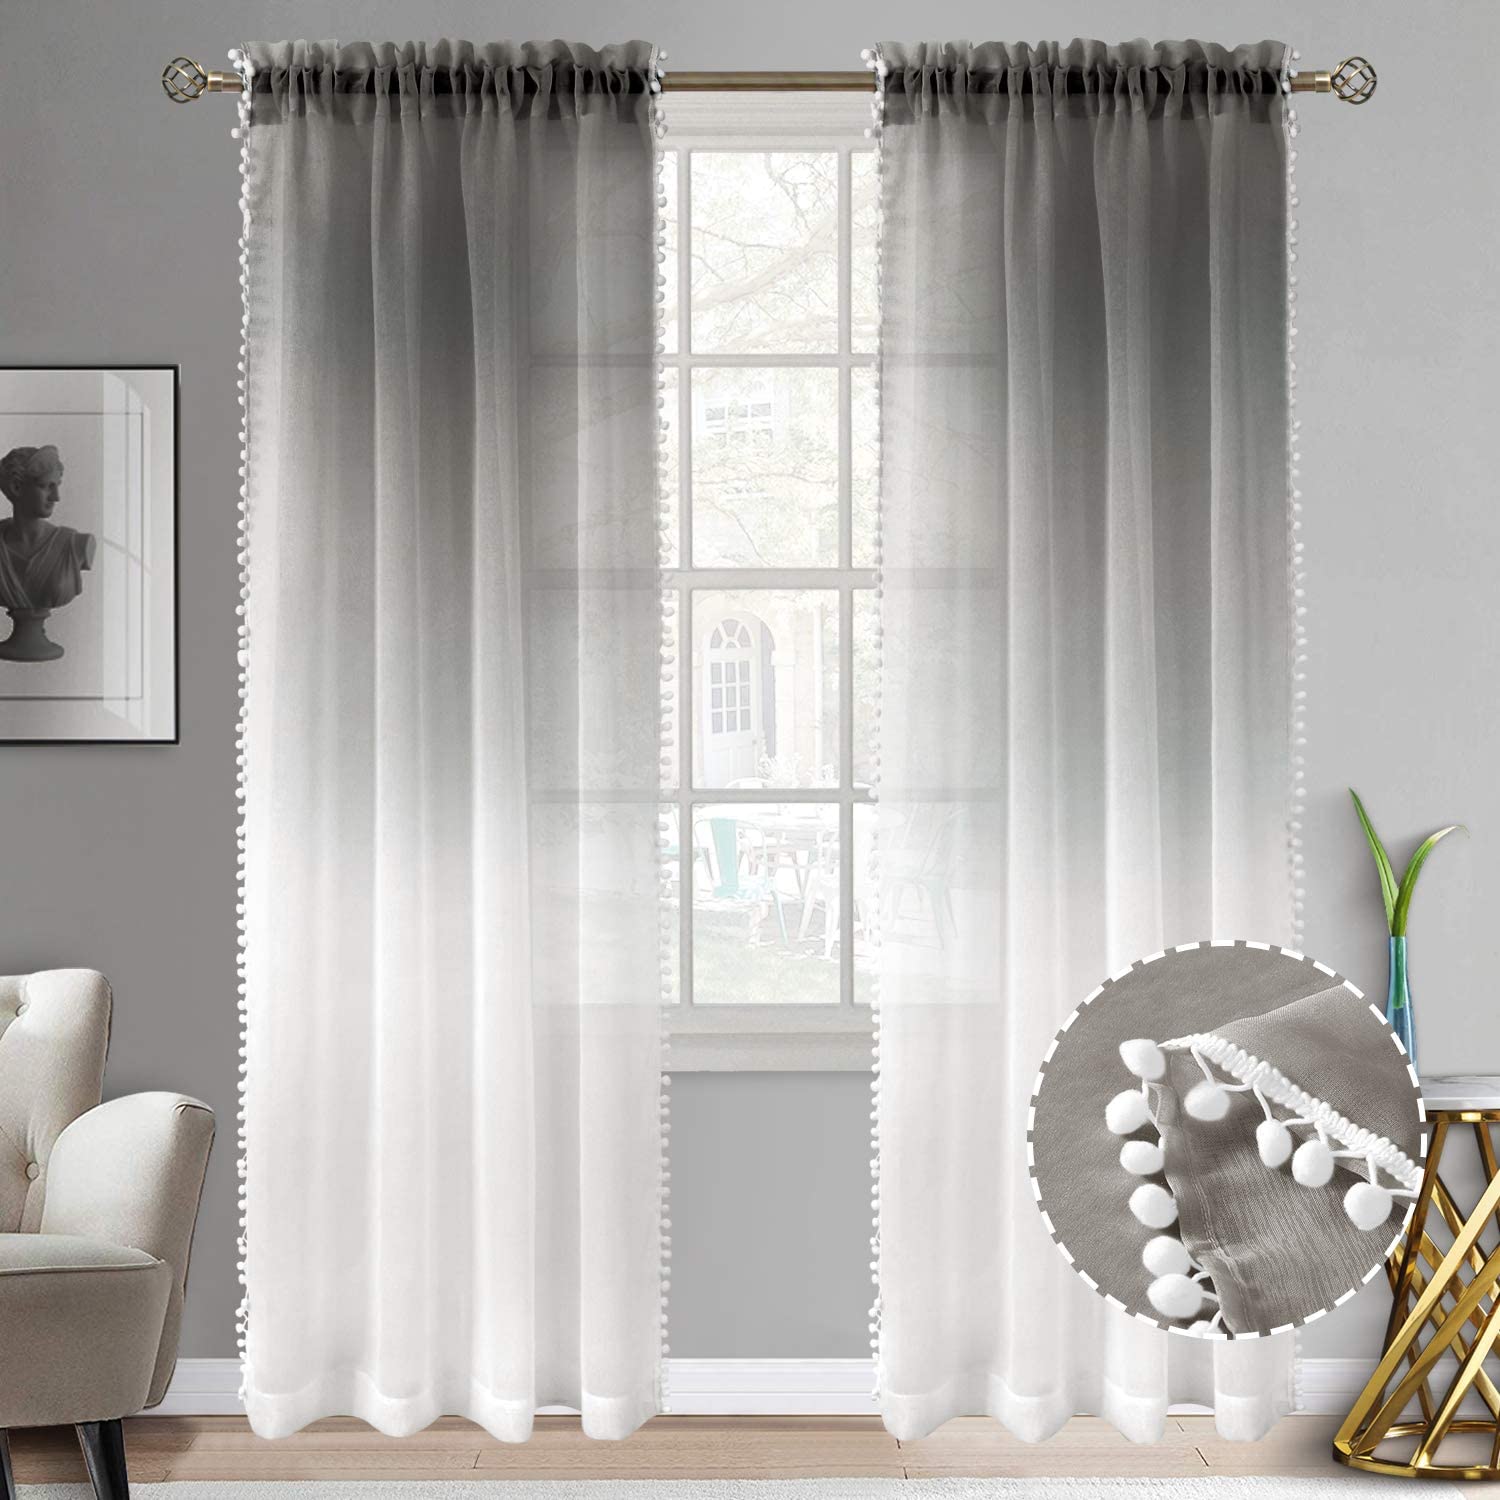 Bgment Ombre Sheer Curtains With Pom, Ombre Sheer Curtains